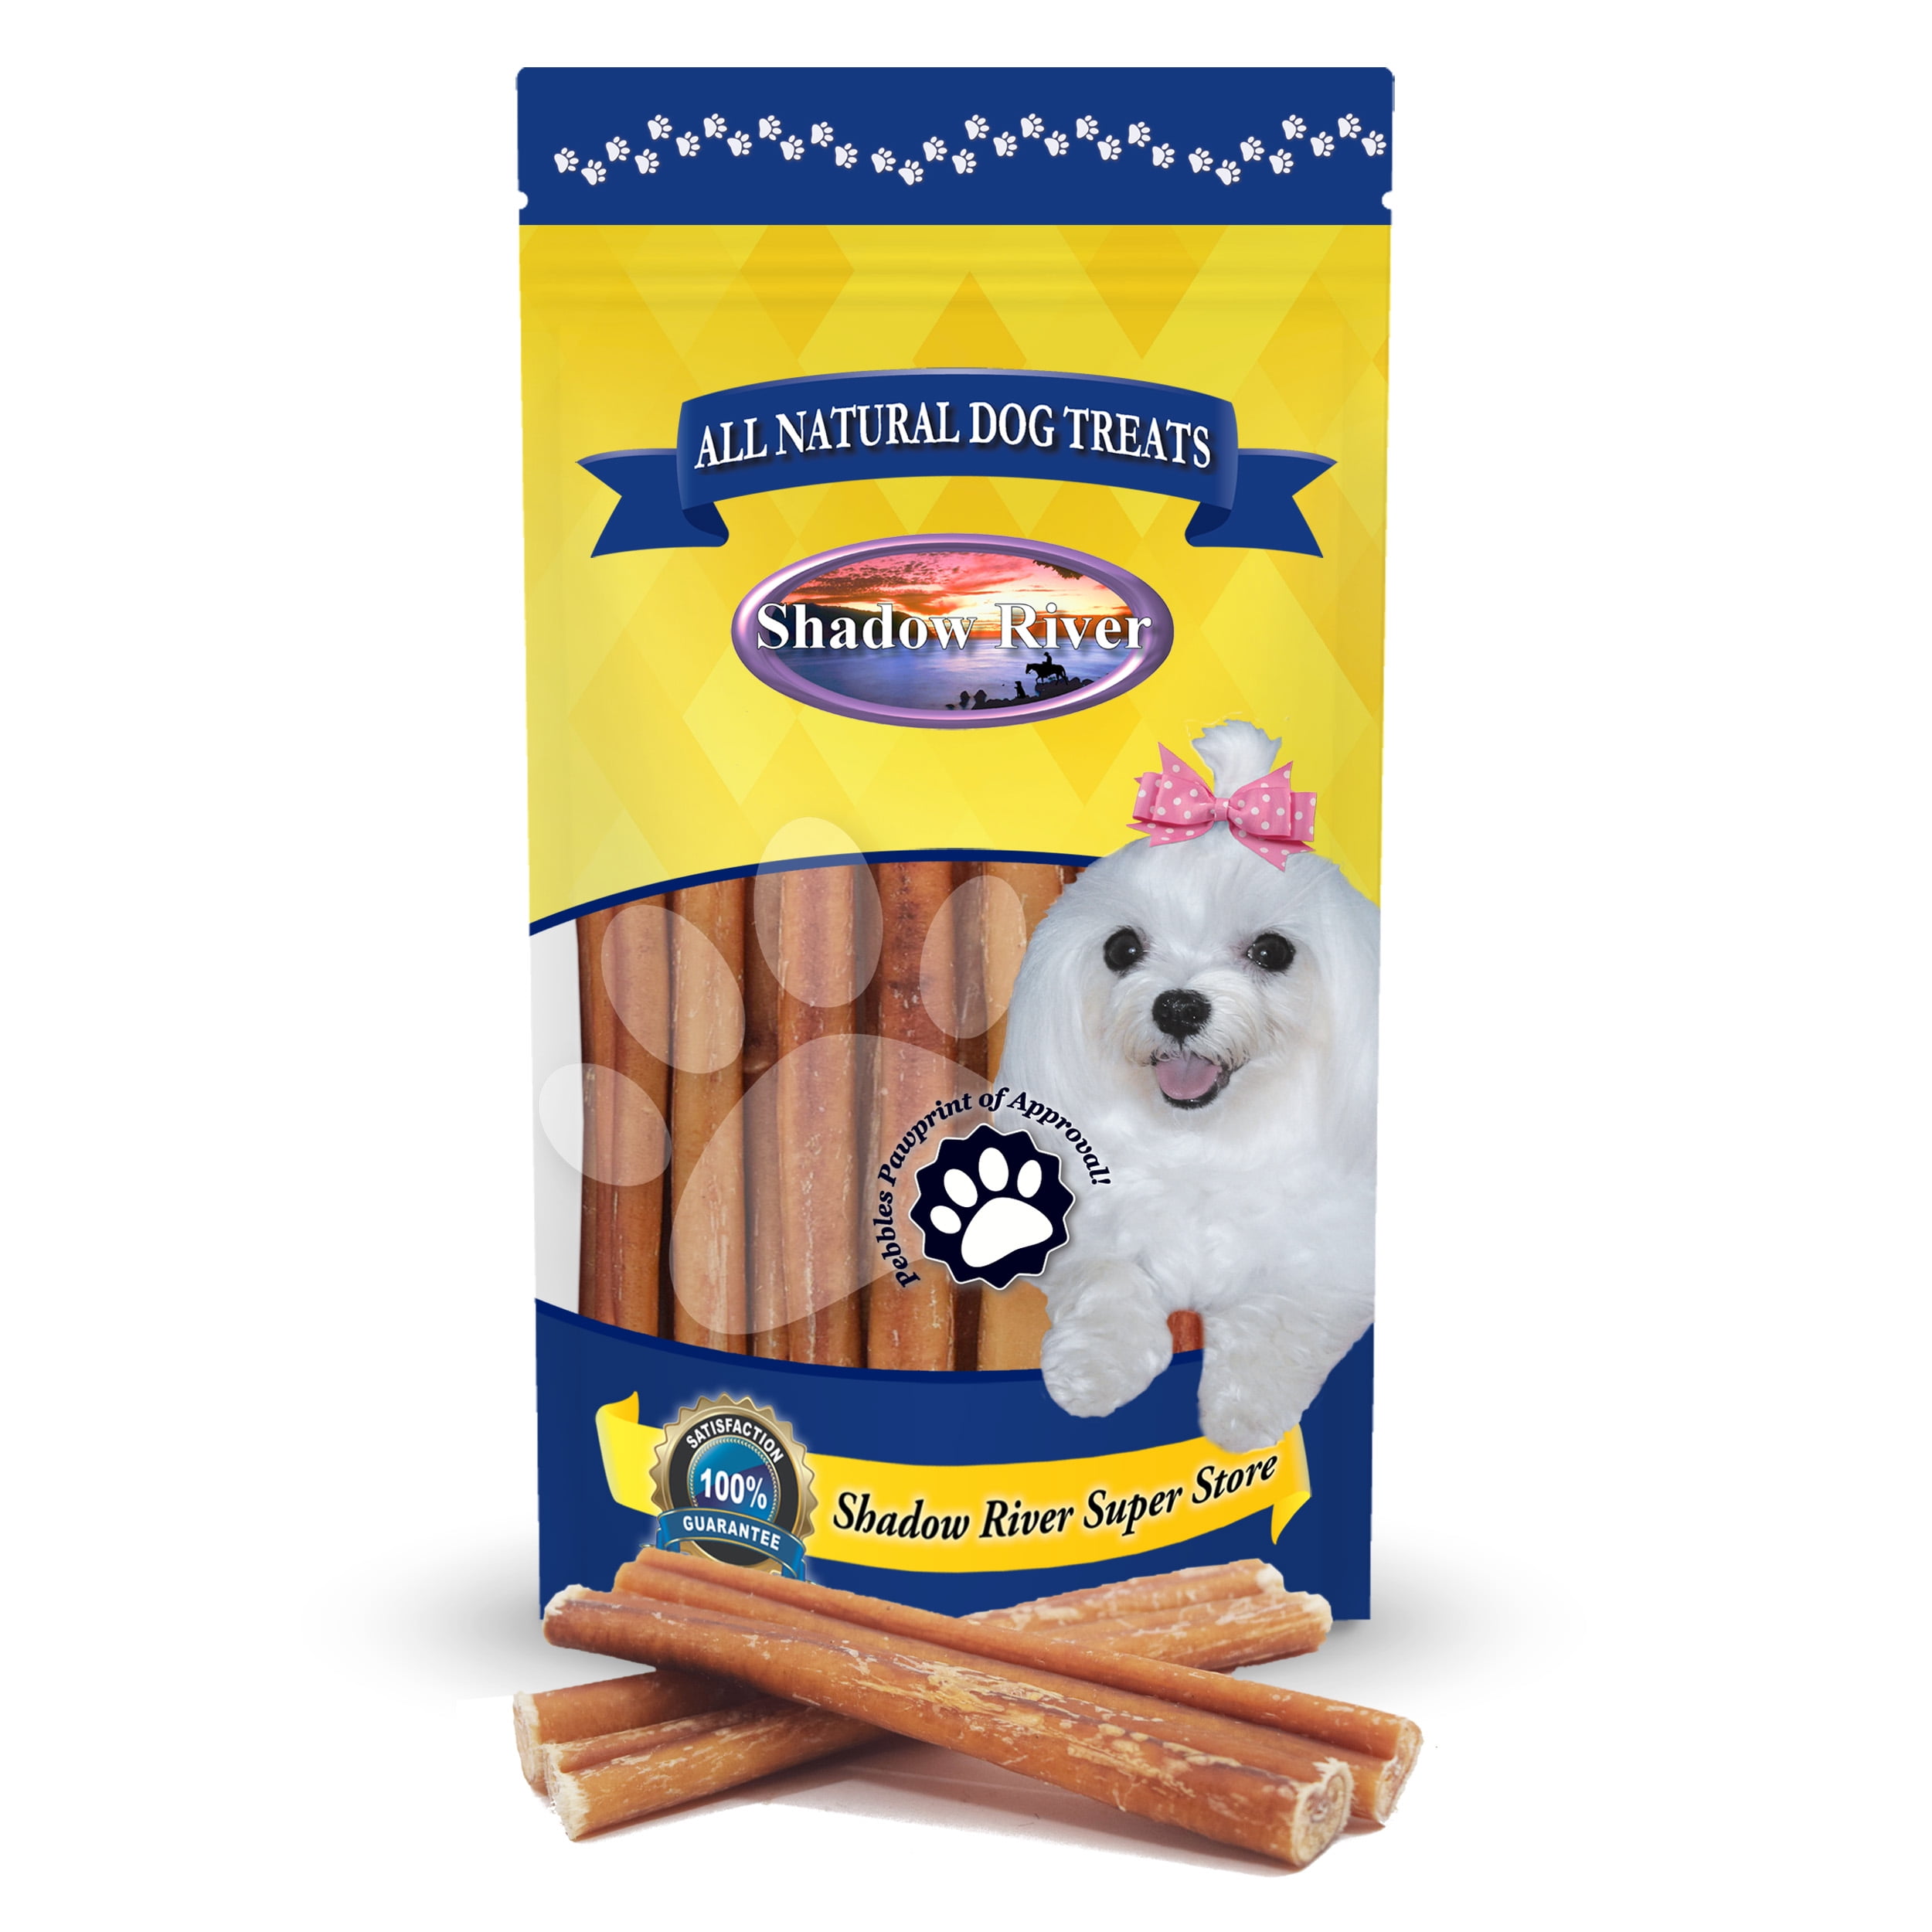 High in Protein No Grain Jumbo Extra Thick Dog Dental Chew Treats Downtown Pet Supply 6 and 12 inch Premium All Natural Beef Bully Sticks Low in Fat 